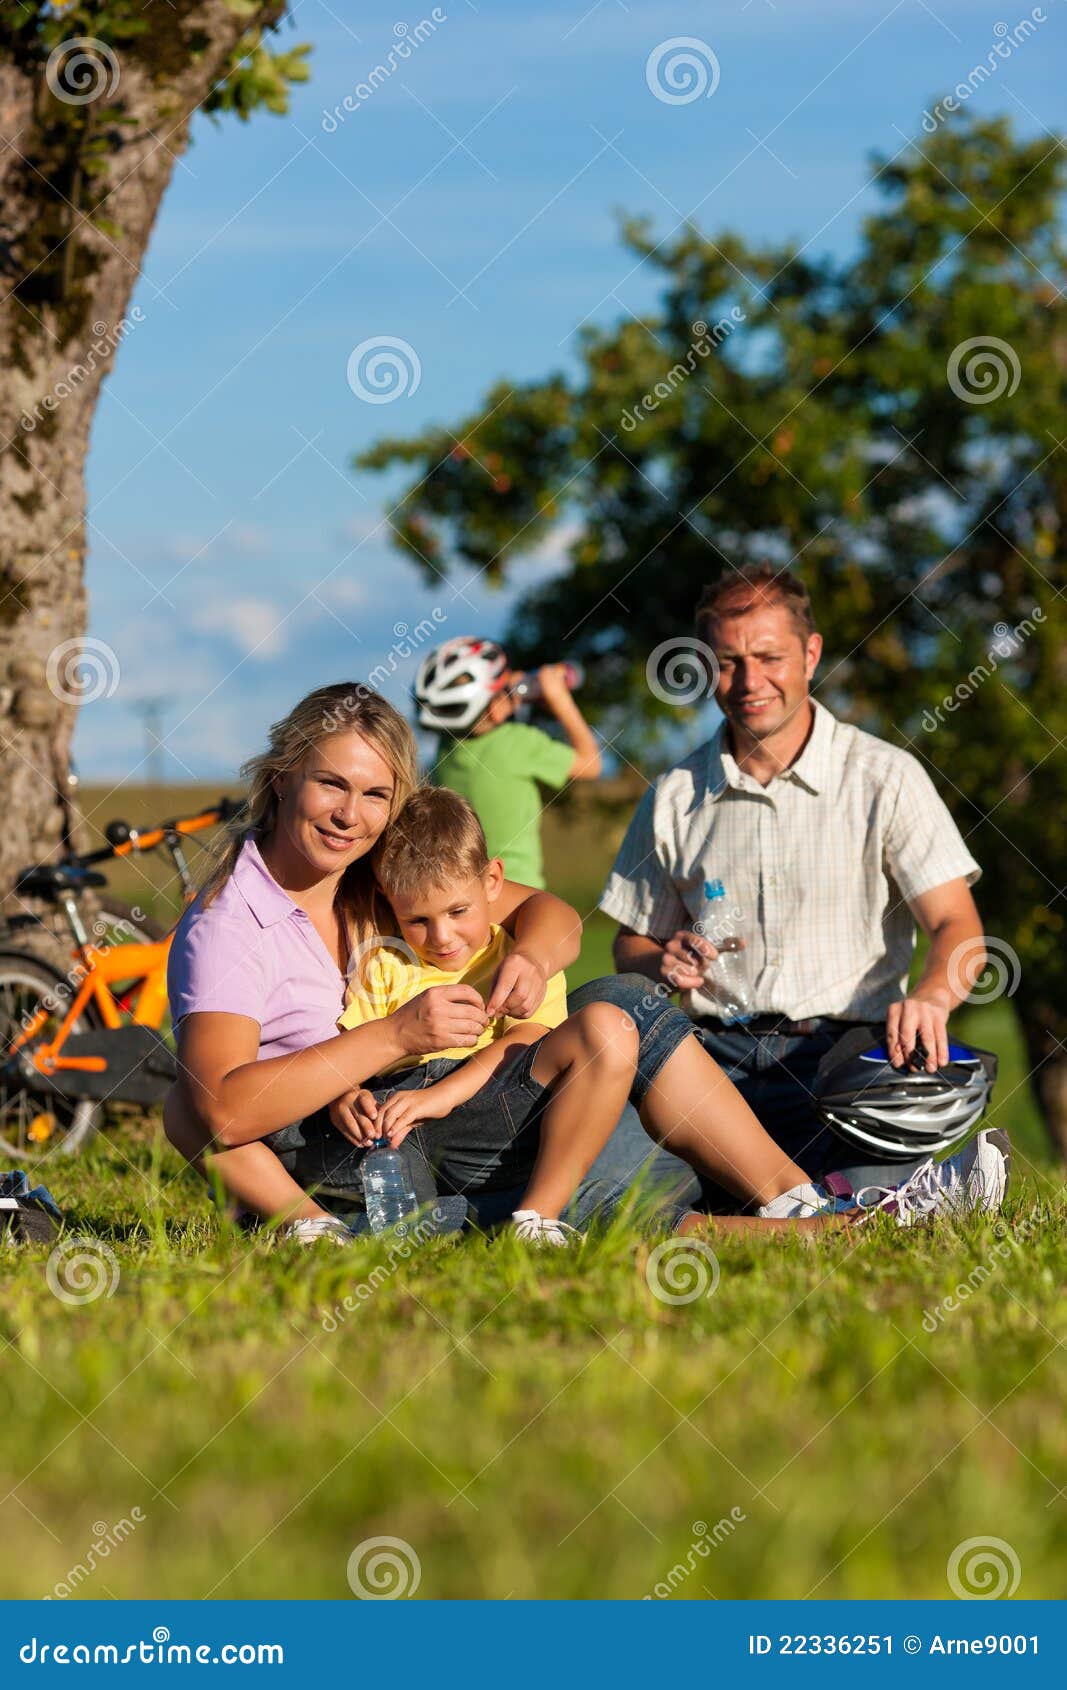 family on getaway with bikes